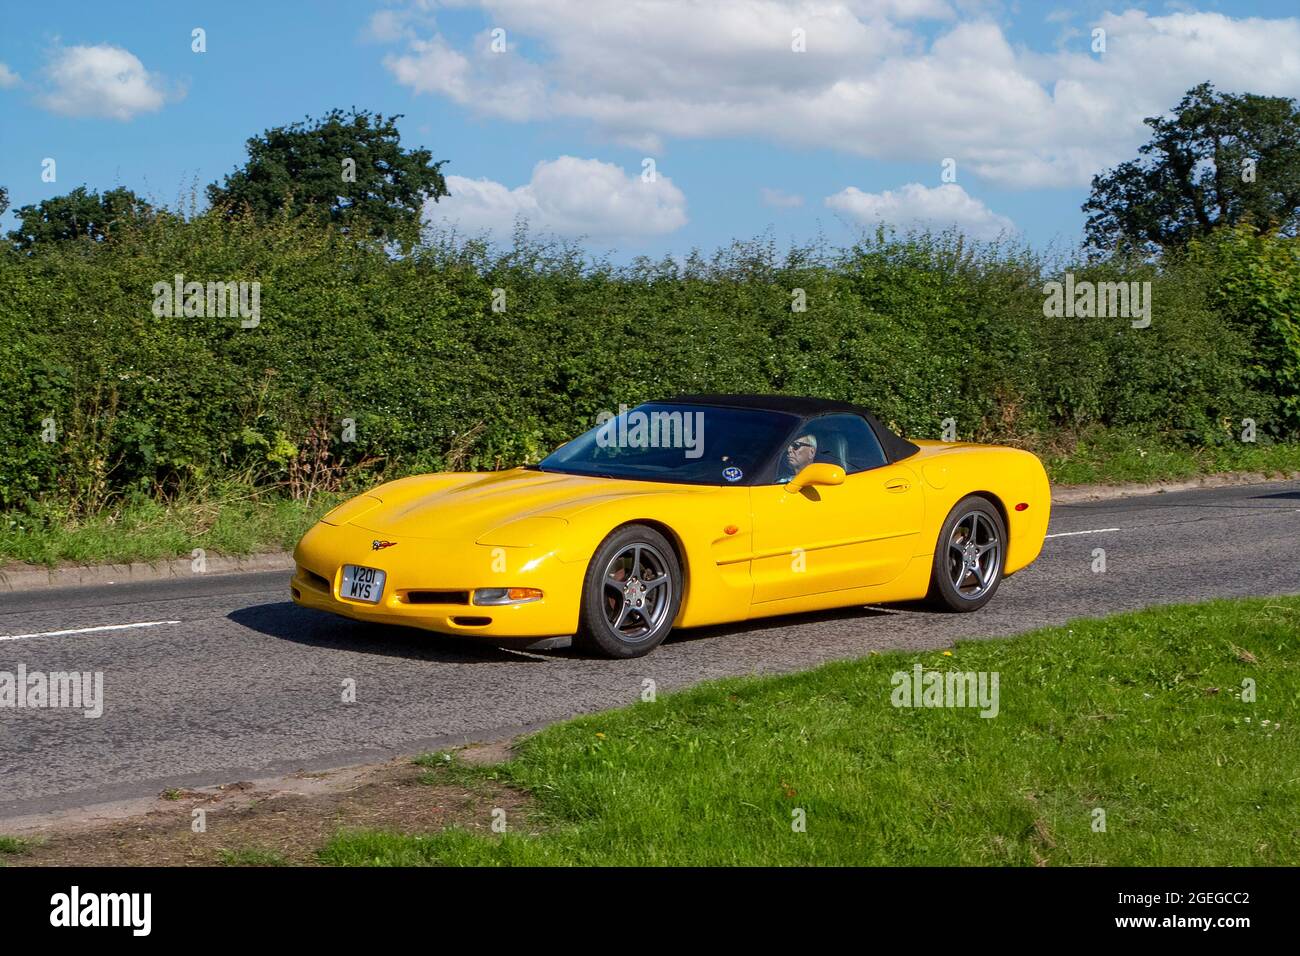 A front view of Yellow Chevrolet Gmc Corvette Roadster vintage classic car retro driver vehicle automobile Stock Photo